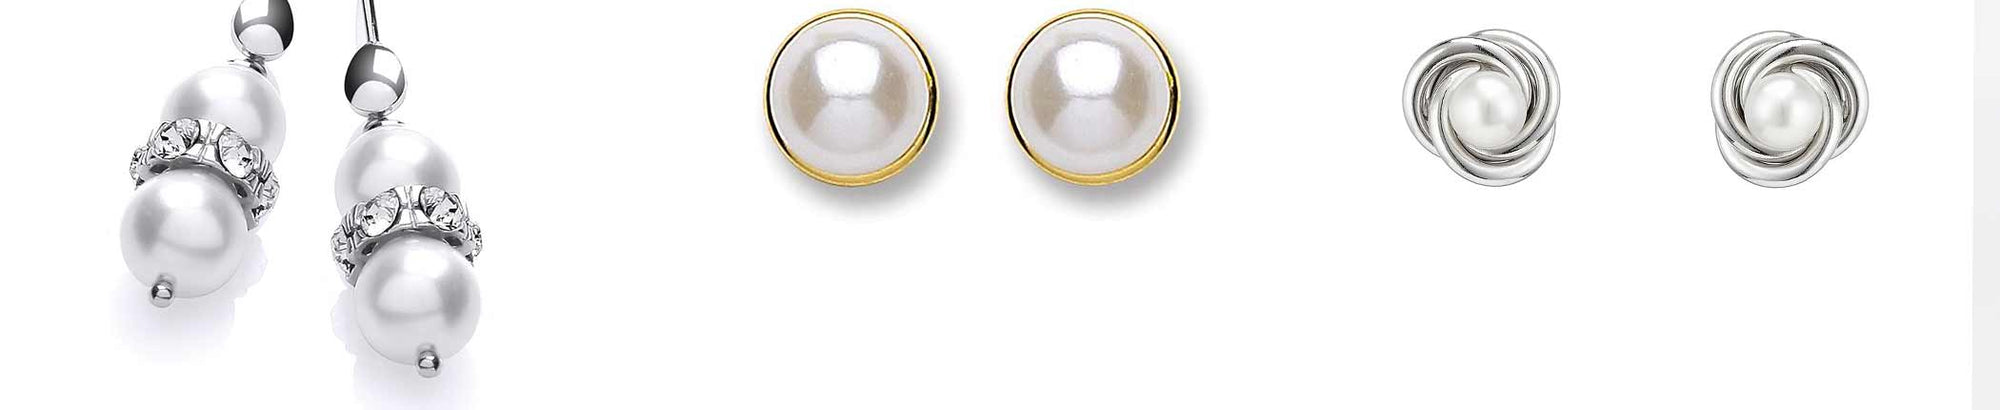 <font color=#000000>Pearl drop earrings; everything you need to know</font>